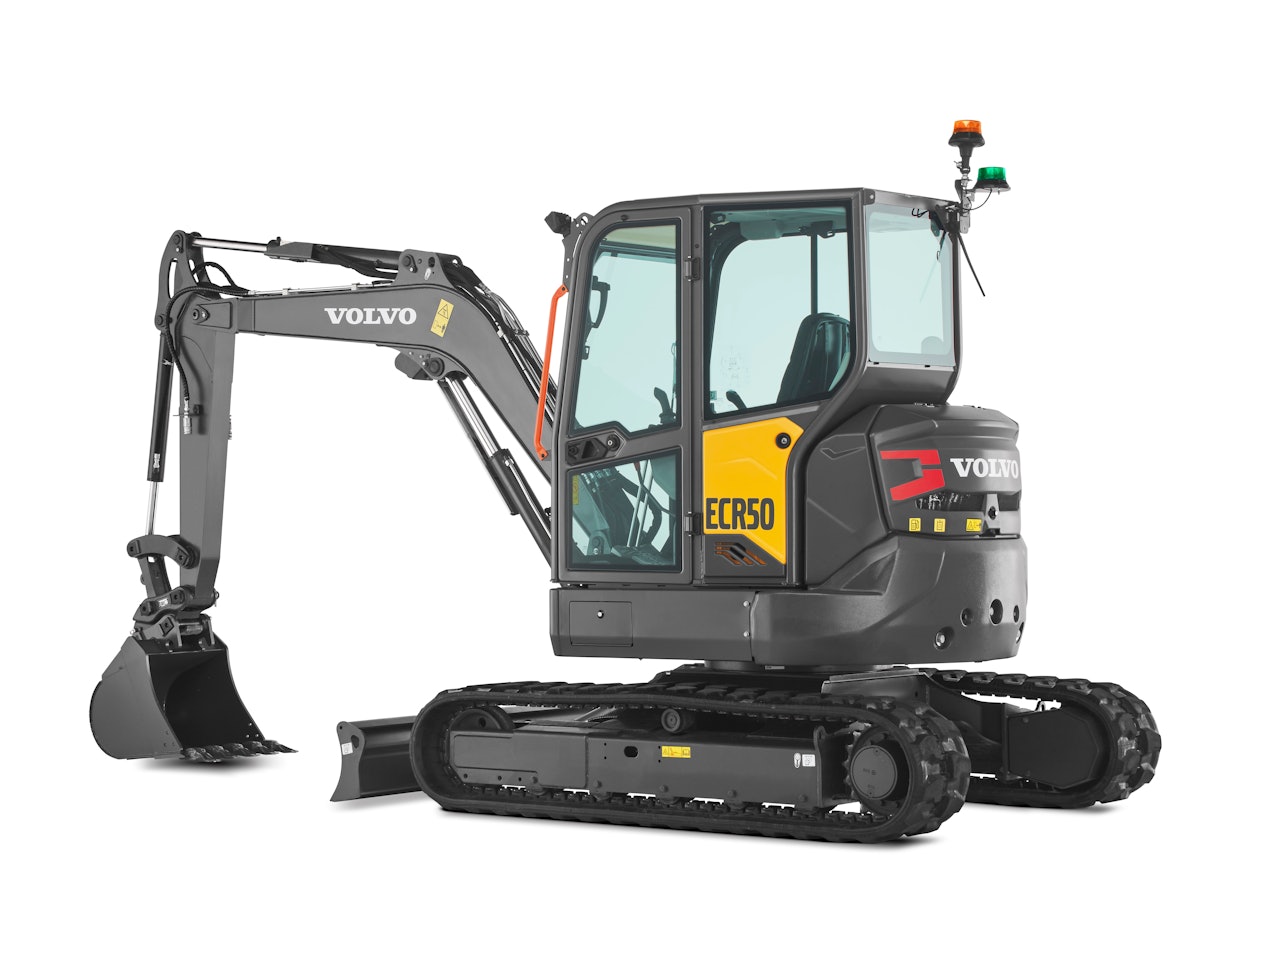 Volvo CE Introduces Two New Short-Swing Compact Excavators in